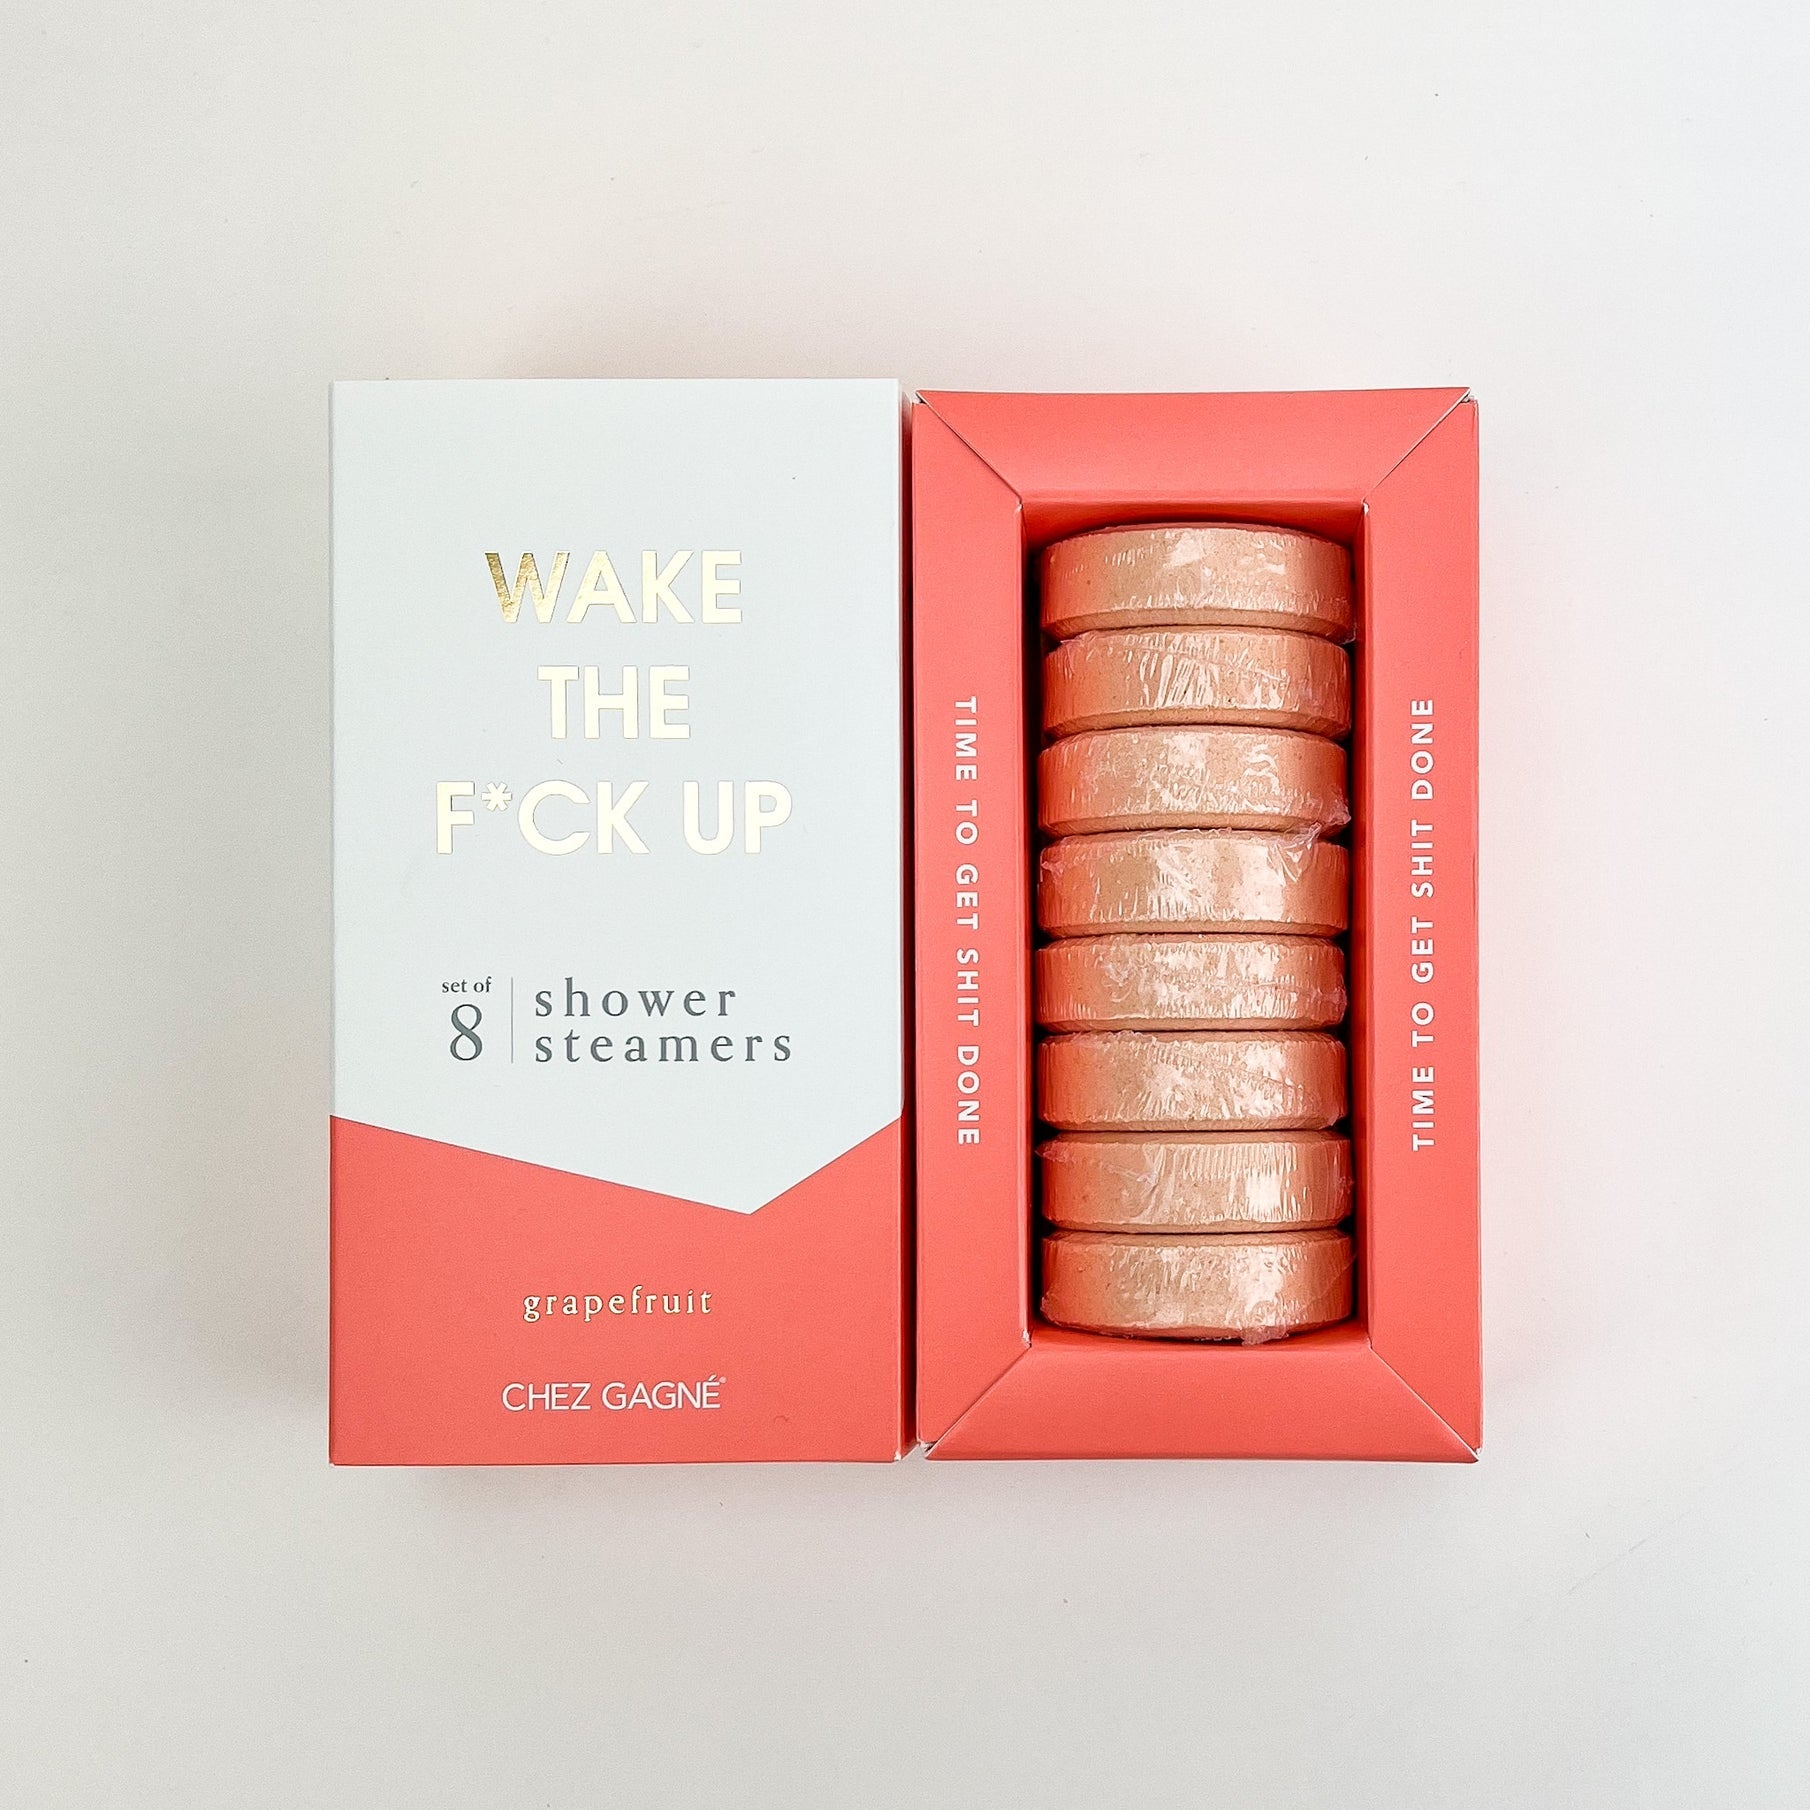 Chez Gagné Shower Steamers - Wake the F**k Up